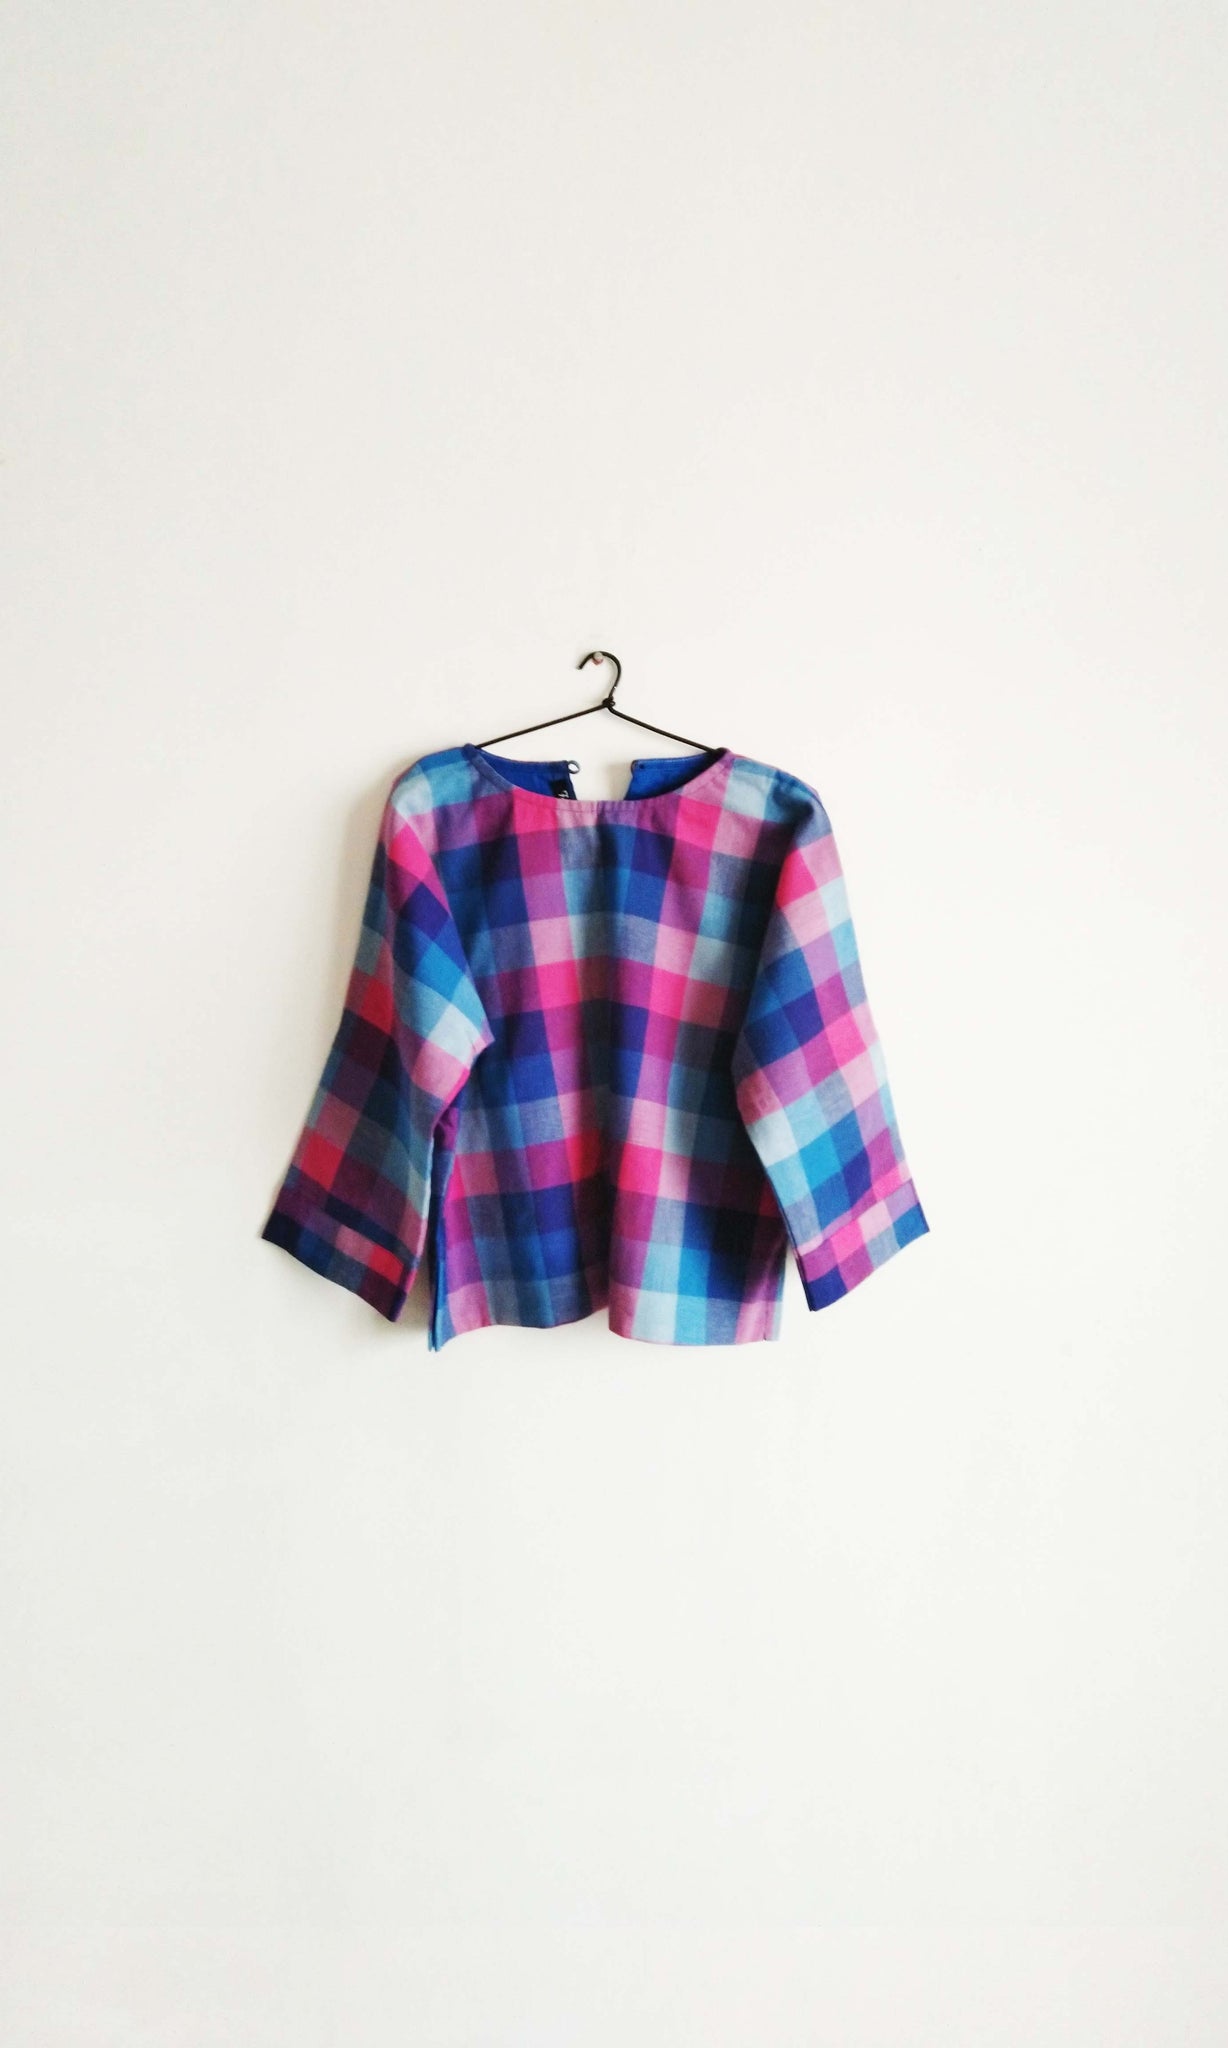 u86 Hand Woven Soft Cotton Blouse | Relaxed Fit | Free Size | Ready To Ship